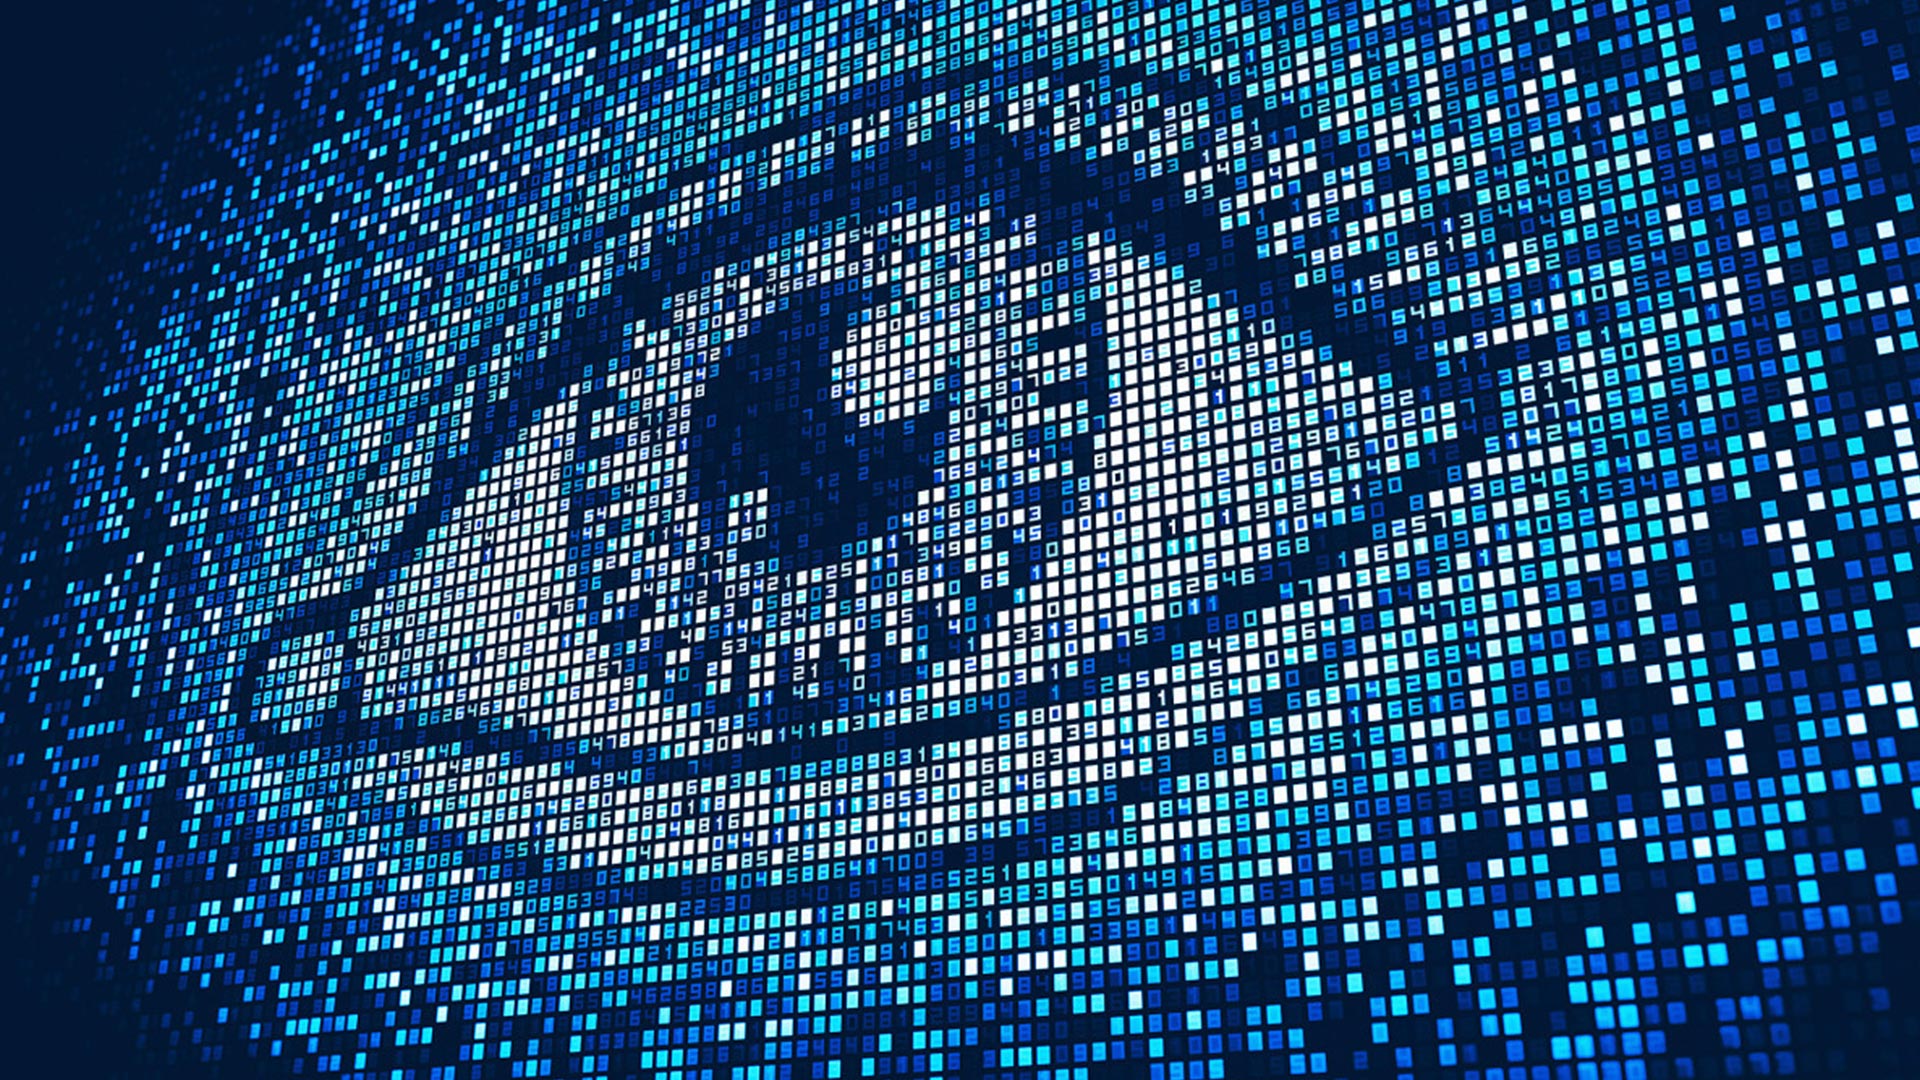 Private Eyes Are Watching You: What it Means to Live (and Be Watched) in the Surveillance Economy